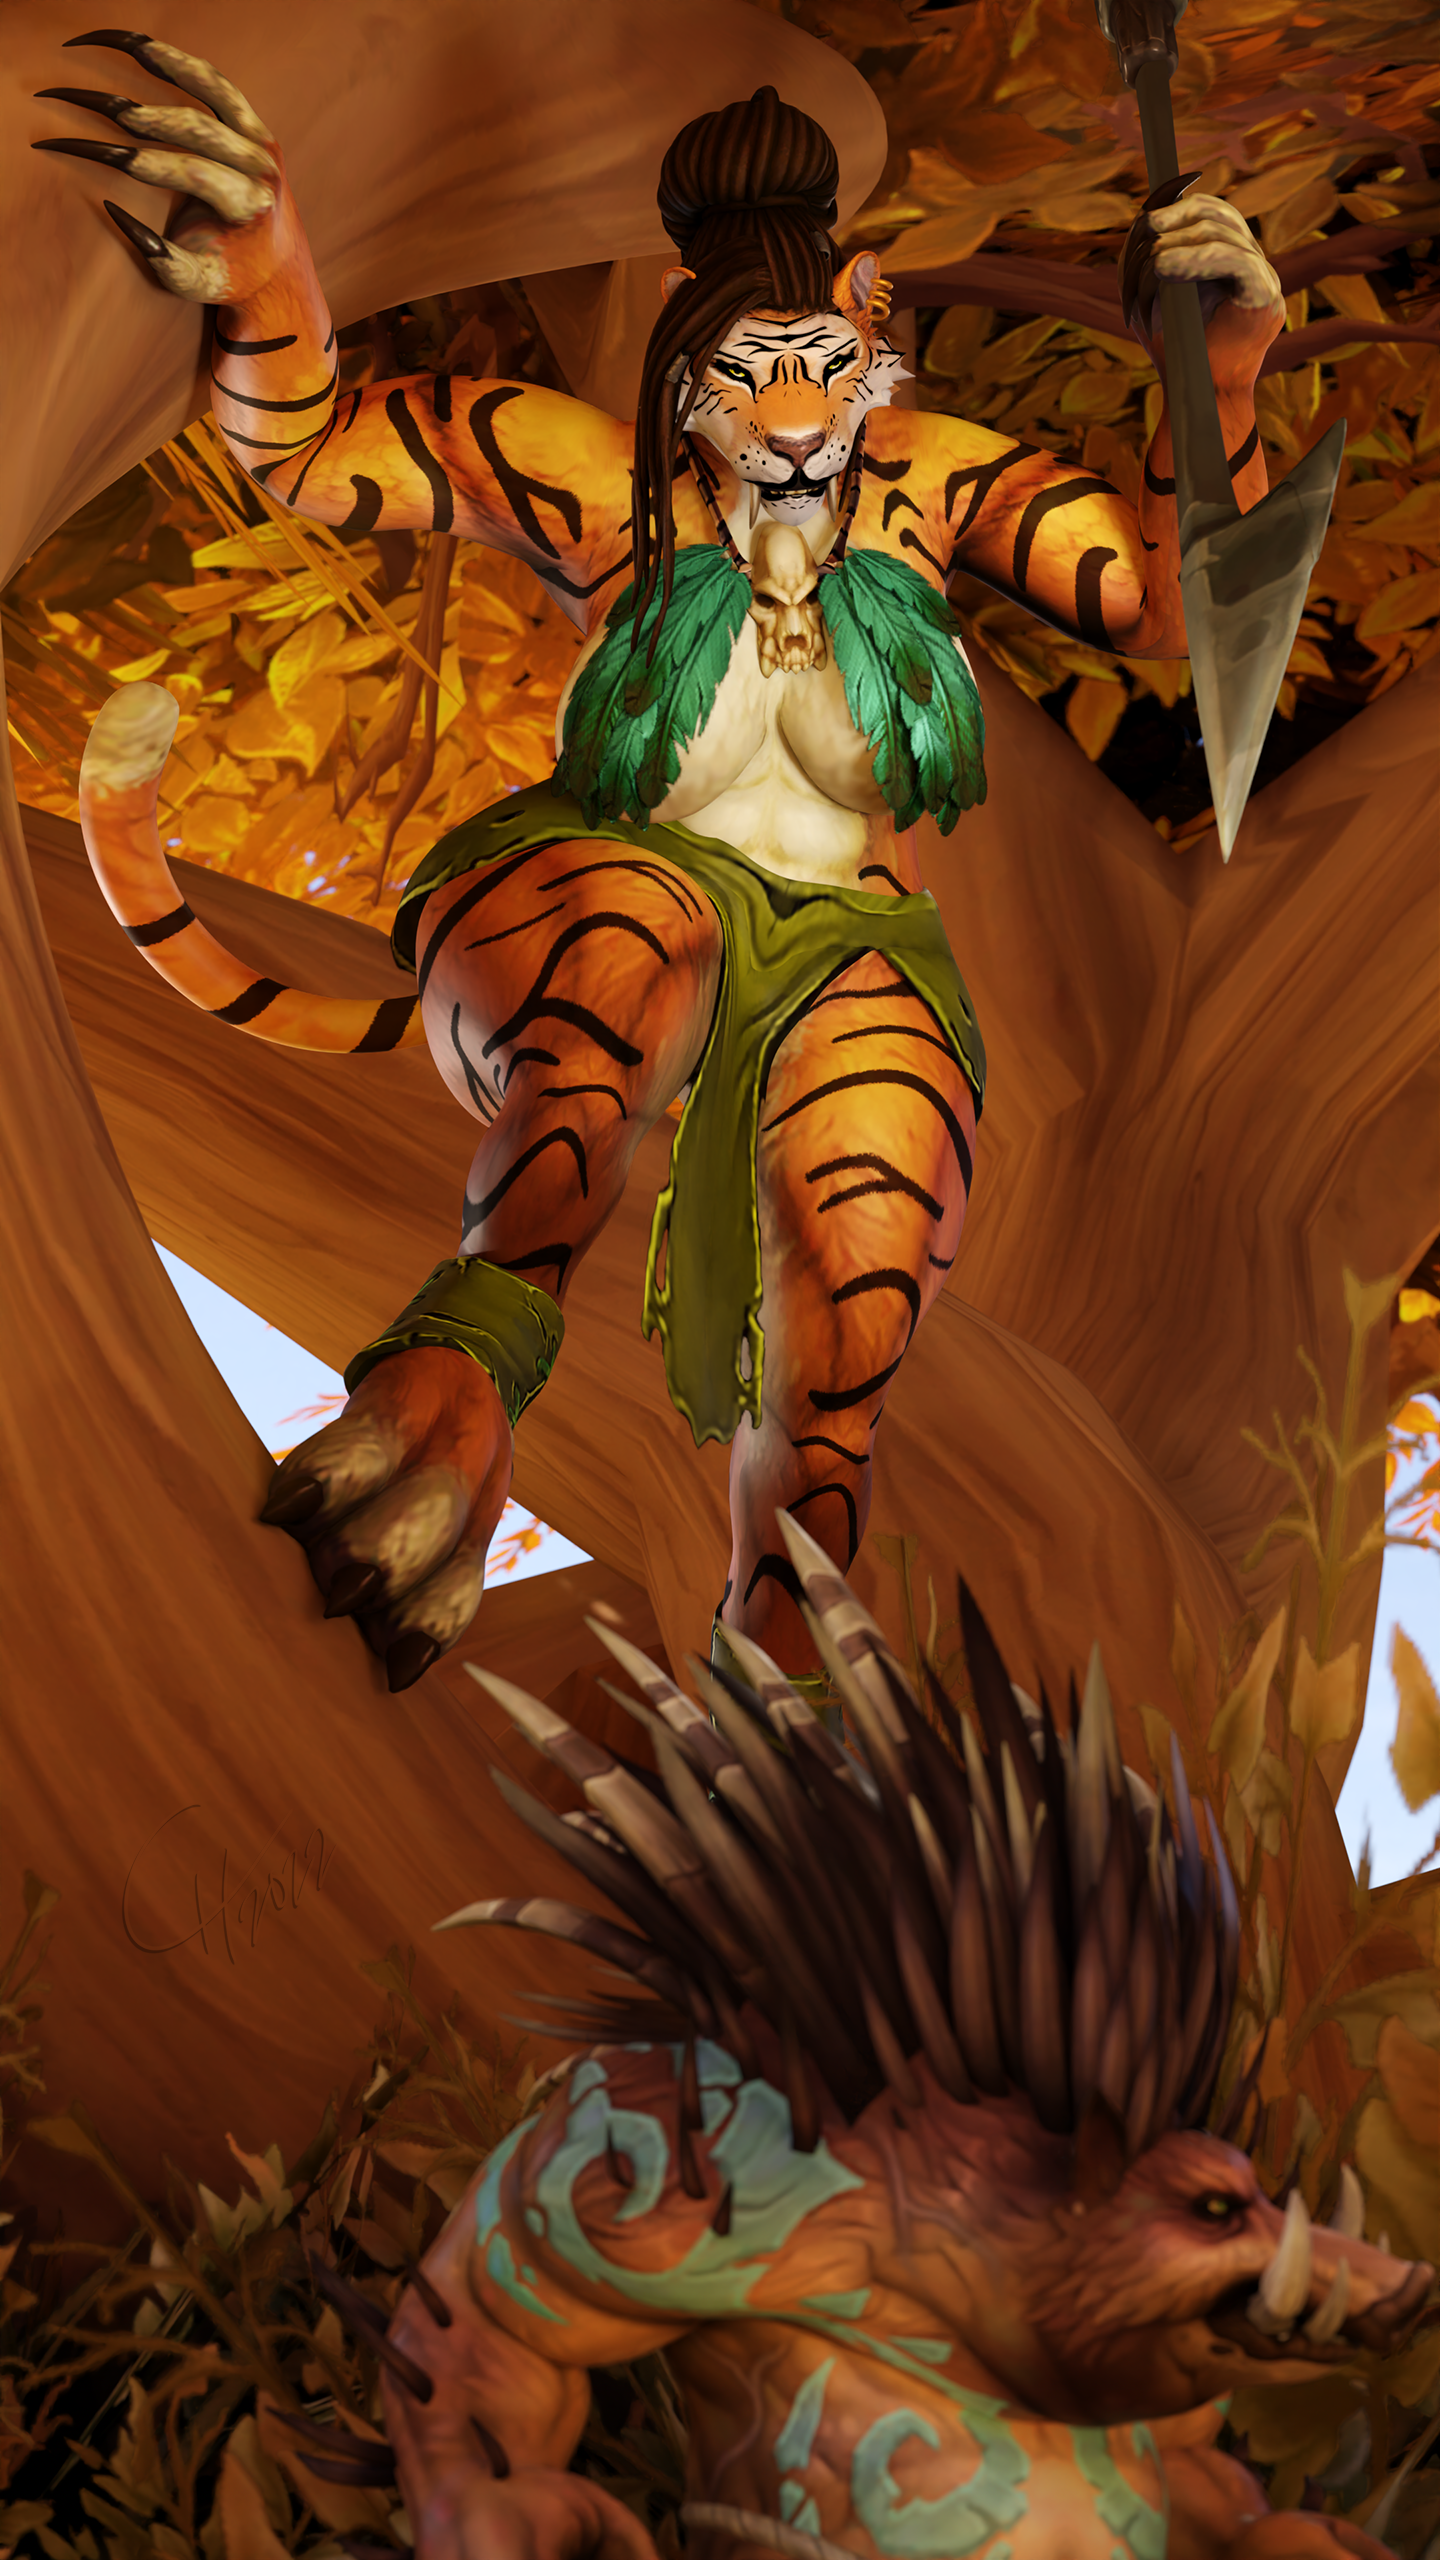 Year of the Tiger [Mob/SFW]
Thanks to some interdimensional meddling,
the region of Barrens has gained new inhabitants
from the alternative-Draeneor and are causing
issues with the balance of the local wildlife.
[b][url=http://bakaras.com/murlocish/albums/userpics/10001/29/2022YearofTiger01XL.png]==XL-Size Edit==[/url][/b]
Keywords: OC;Mob;SFW